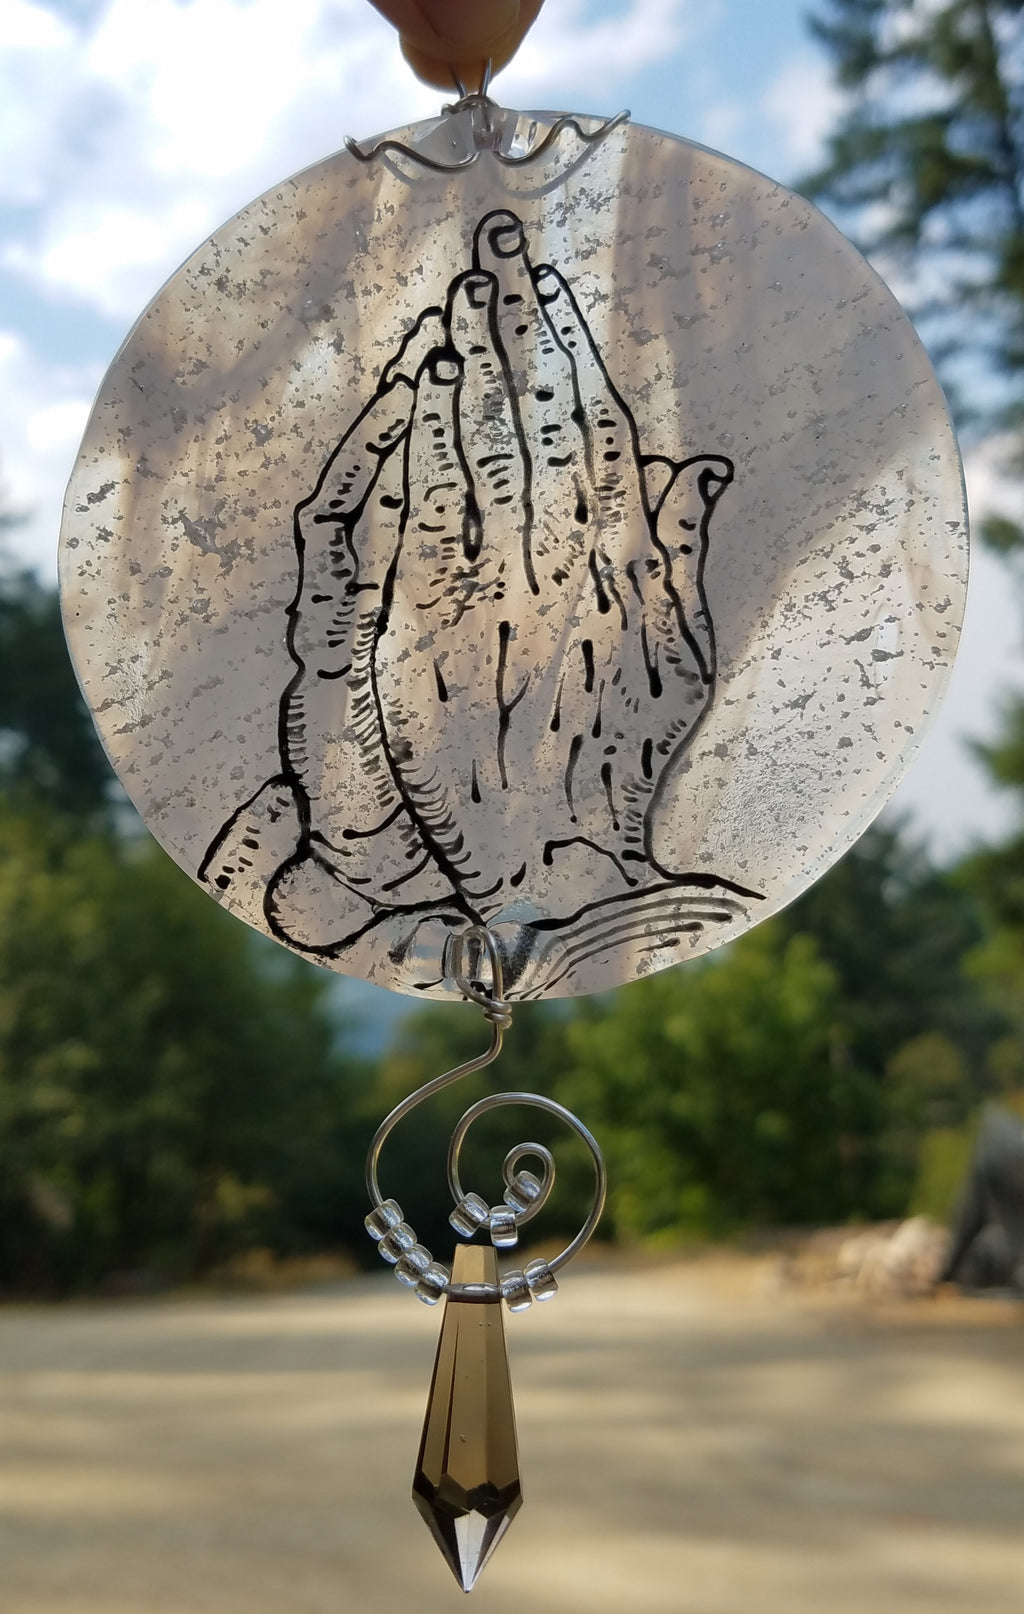 praying hands suncatcher Unique Celebration of life Funeral Memorials. Ashes in Glass Cremation Glass Art Sculptures, Cremation Wind Chimes, Cremation Sun Catchers, Table Displays, & Cremation Jewelry Custom USA Handmade by Infusion Glass. Ashes Infused Glass Human and Pet Cremation Ash Urns  Ashesinfusedglass.com